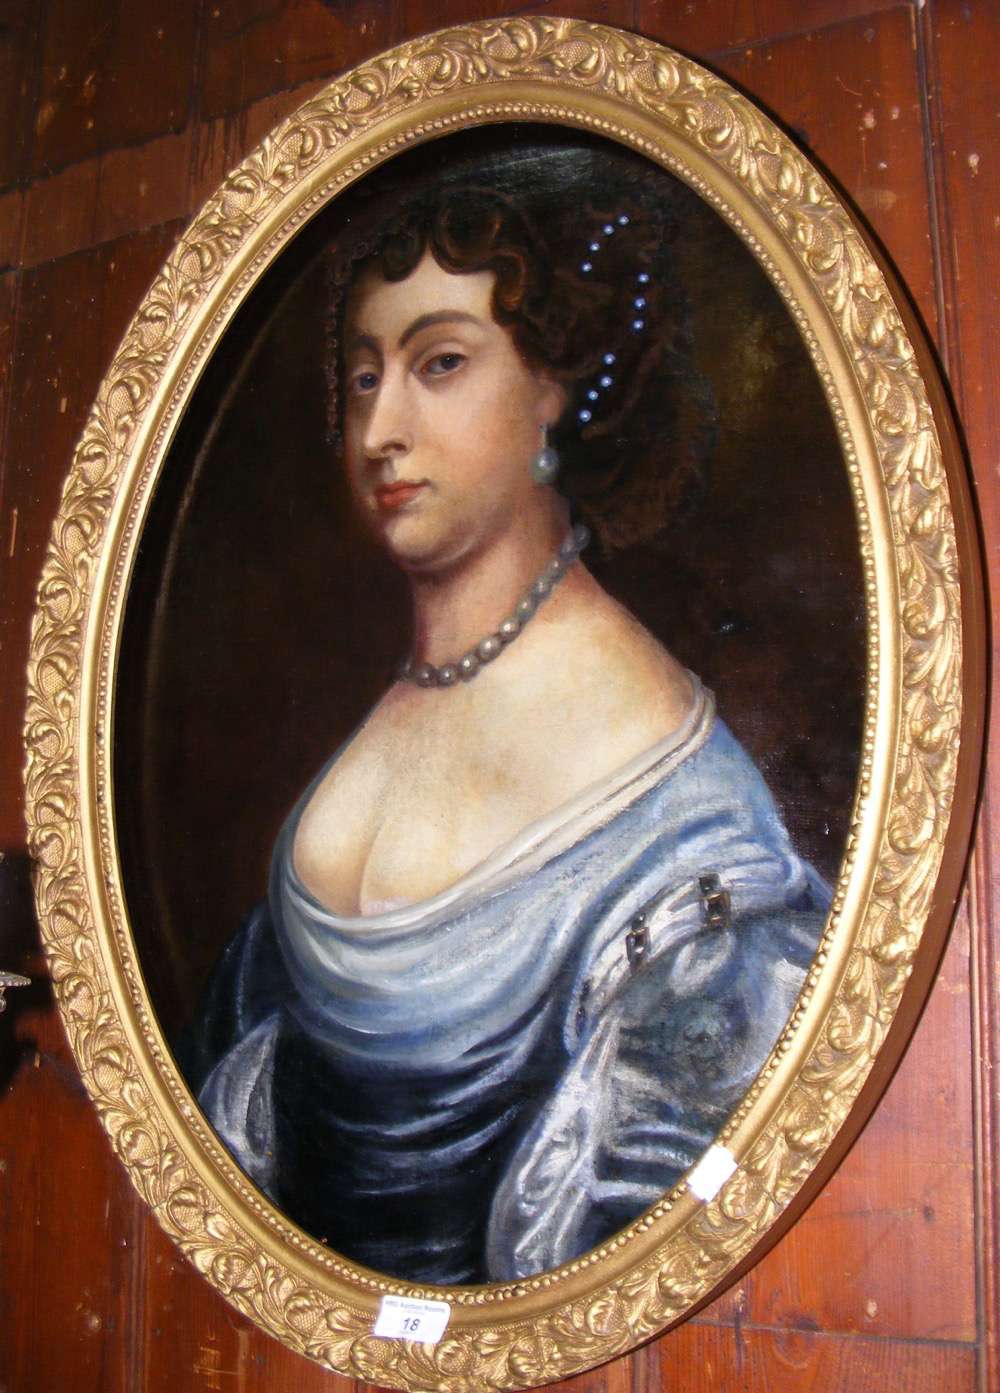 ENGLISH SCHOOL - 60cm x 45cm - oval oil on canvas portrait of lady with pearl necklace